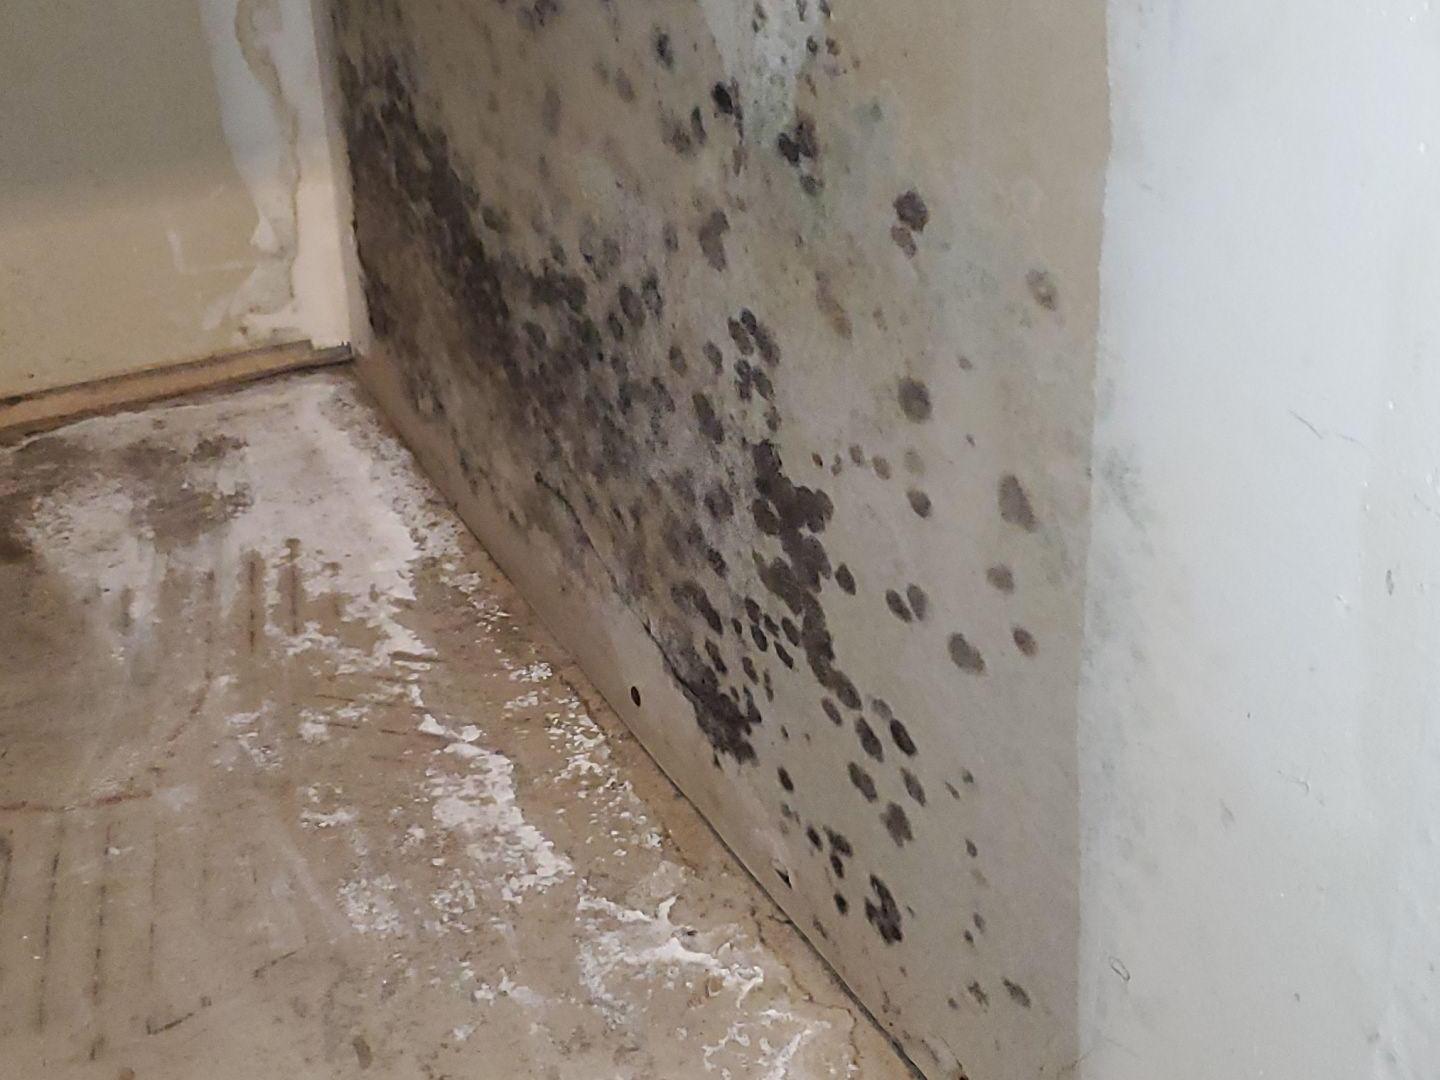 Mold on Wall in Basement